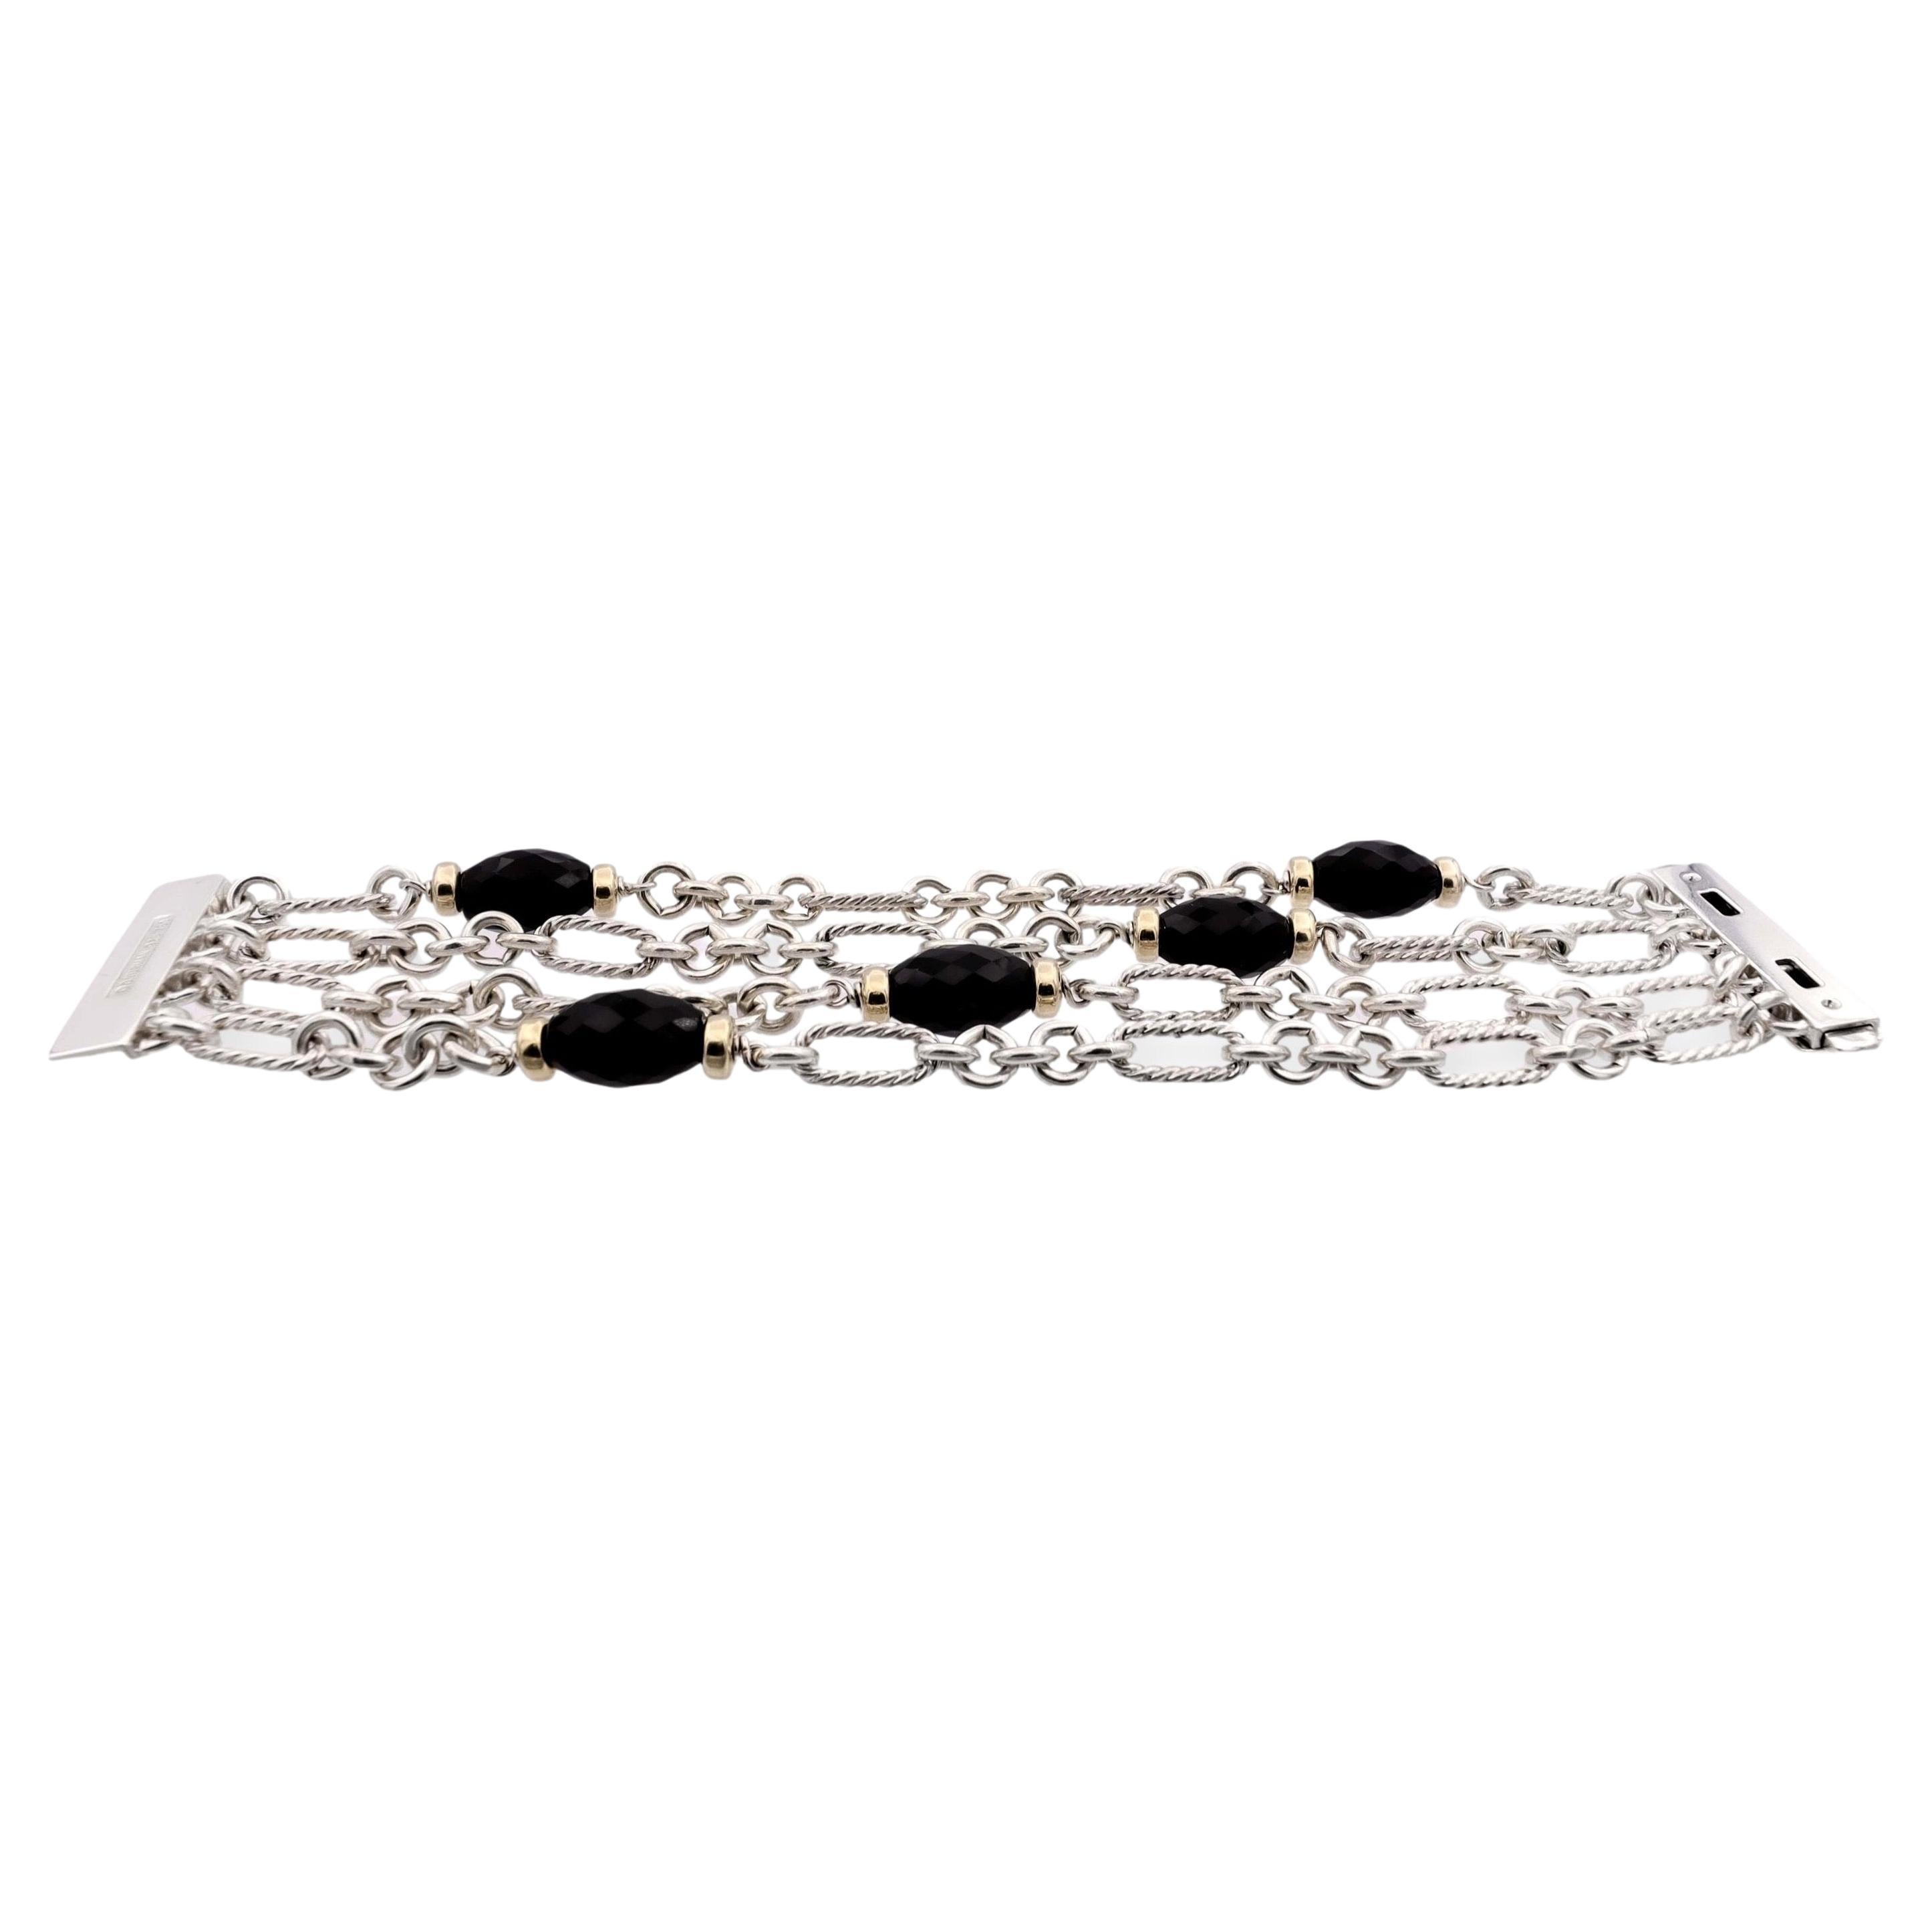 David Yurman Dujour wide bracelet from the Bijoux collection finely crafted in sterling silver and 18 karat yellow gold featuring four rows of articulated oval links , with rope accents, five faceted onyx beads, and ten 18 karat yellow gold